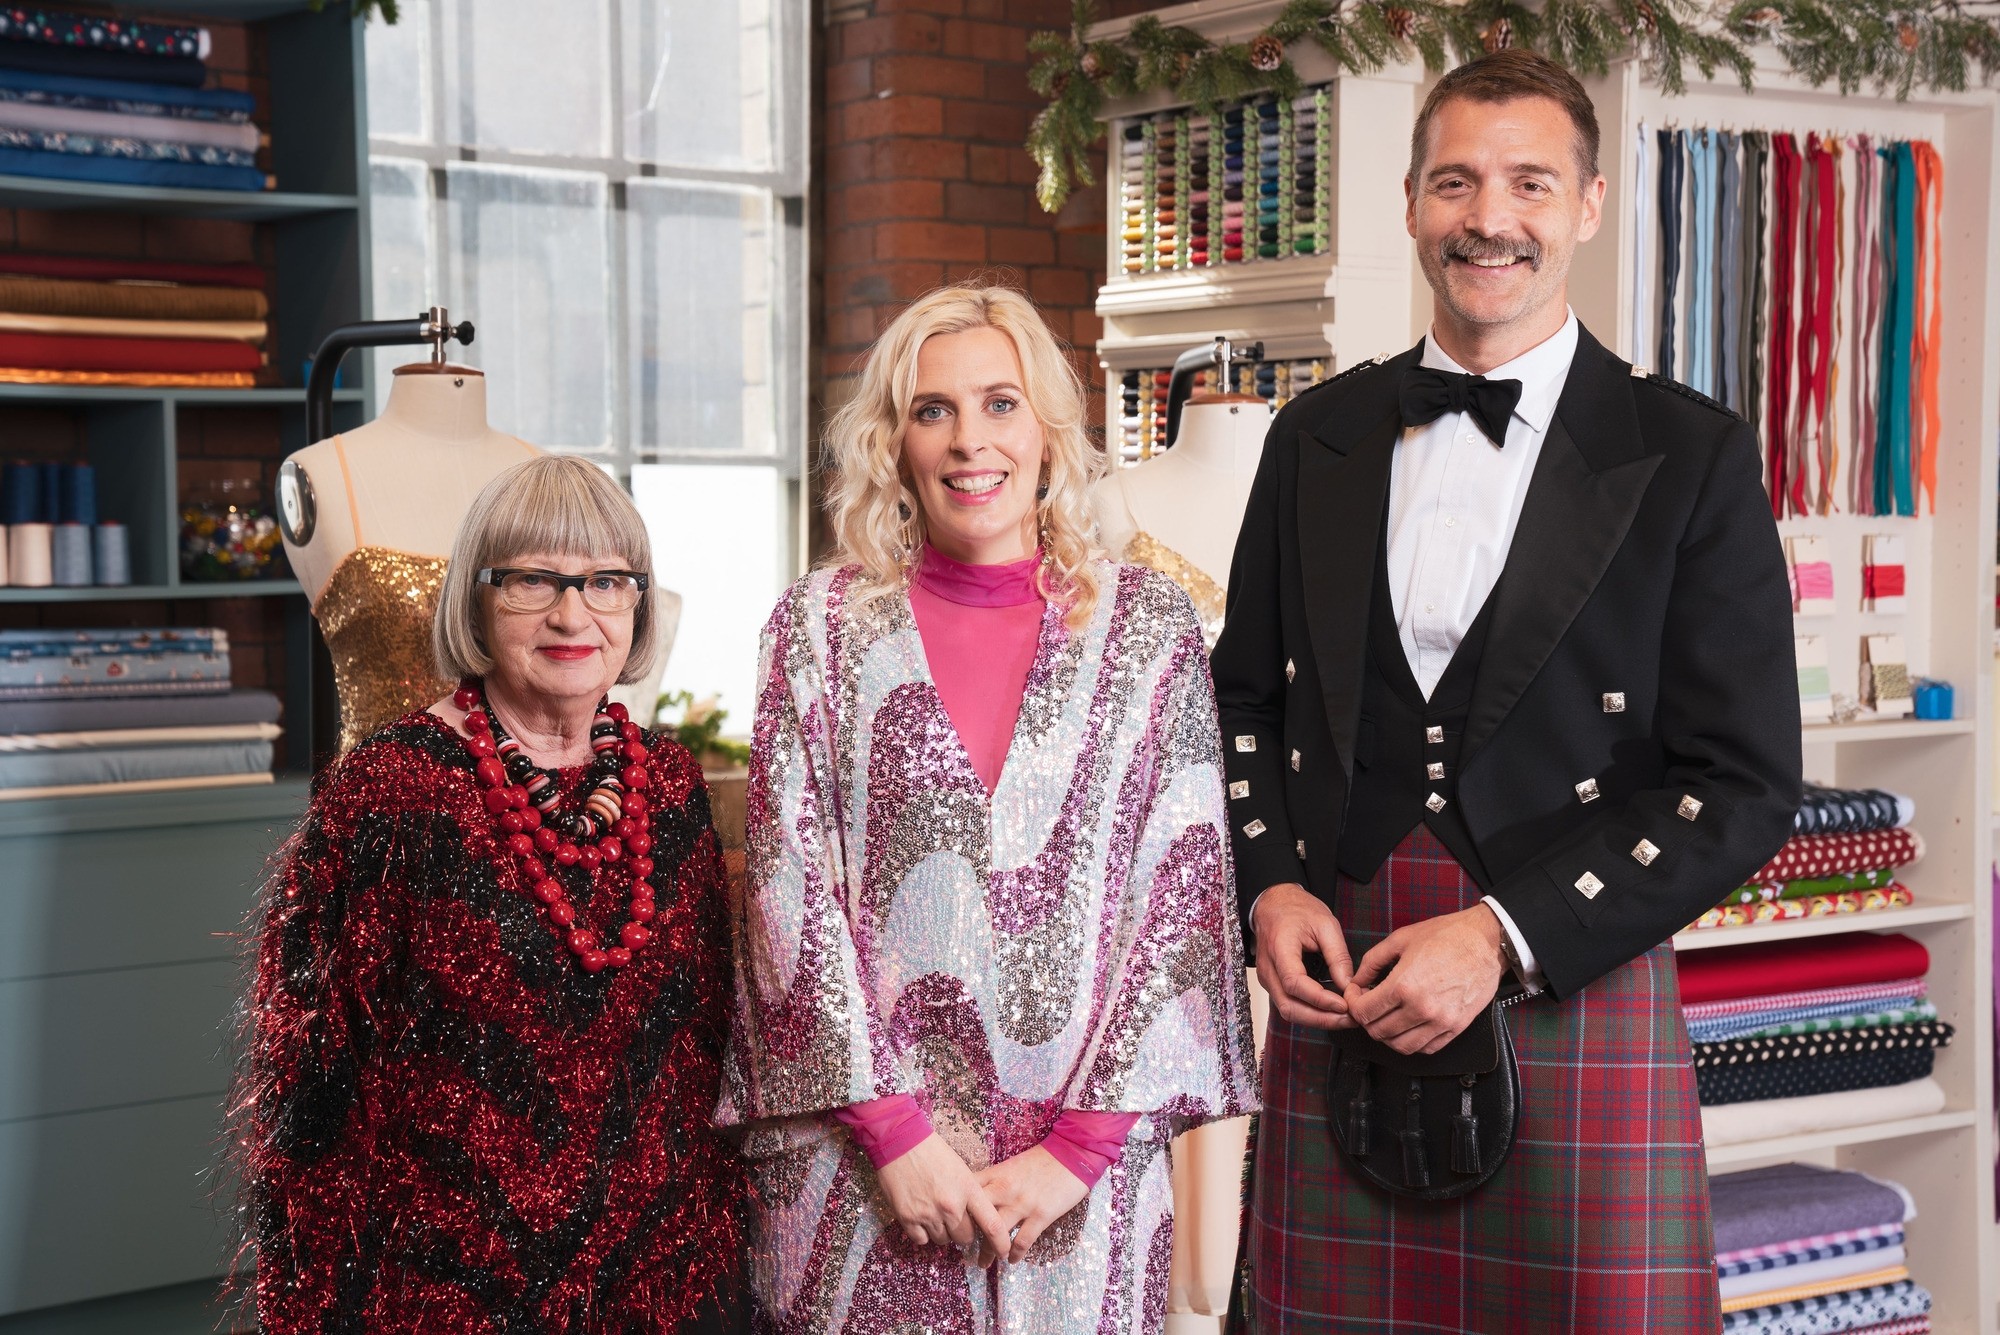 Sara Pascoe and Sewing Bee judges dressed formally for the New Year